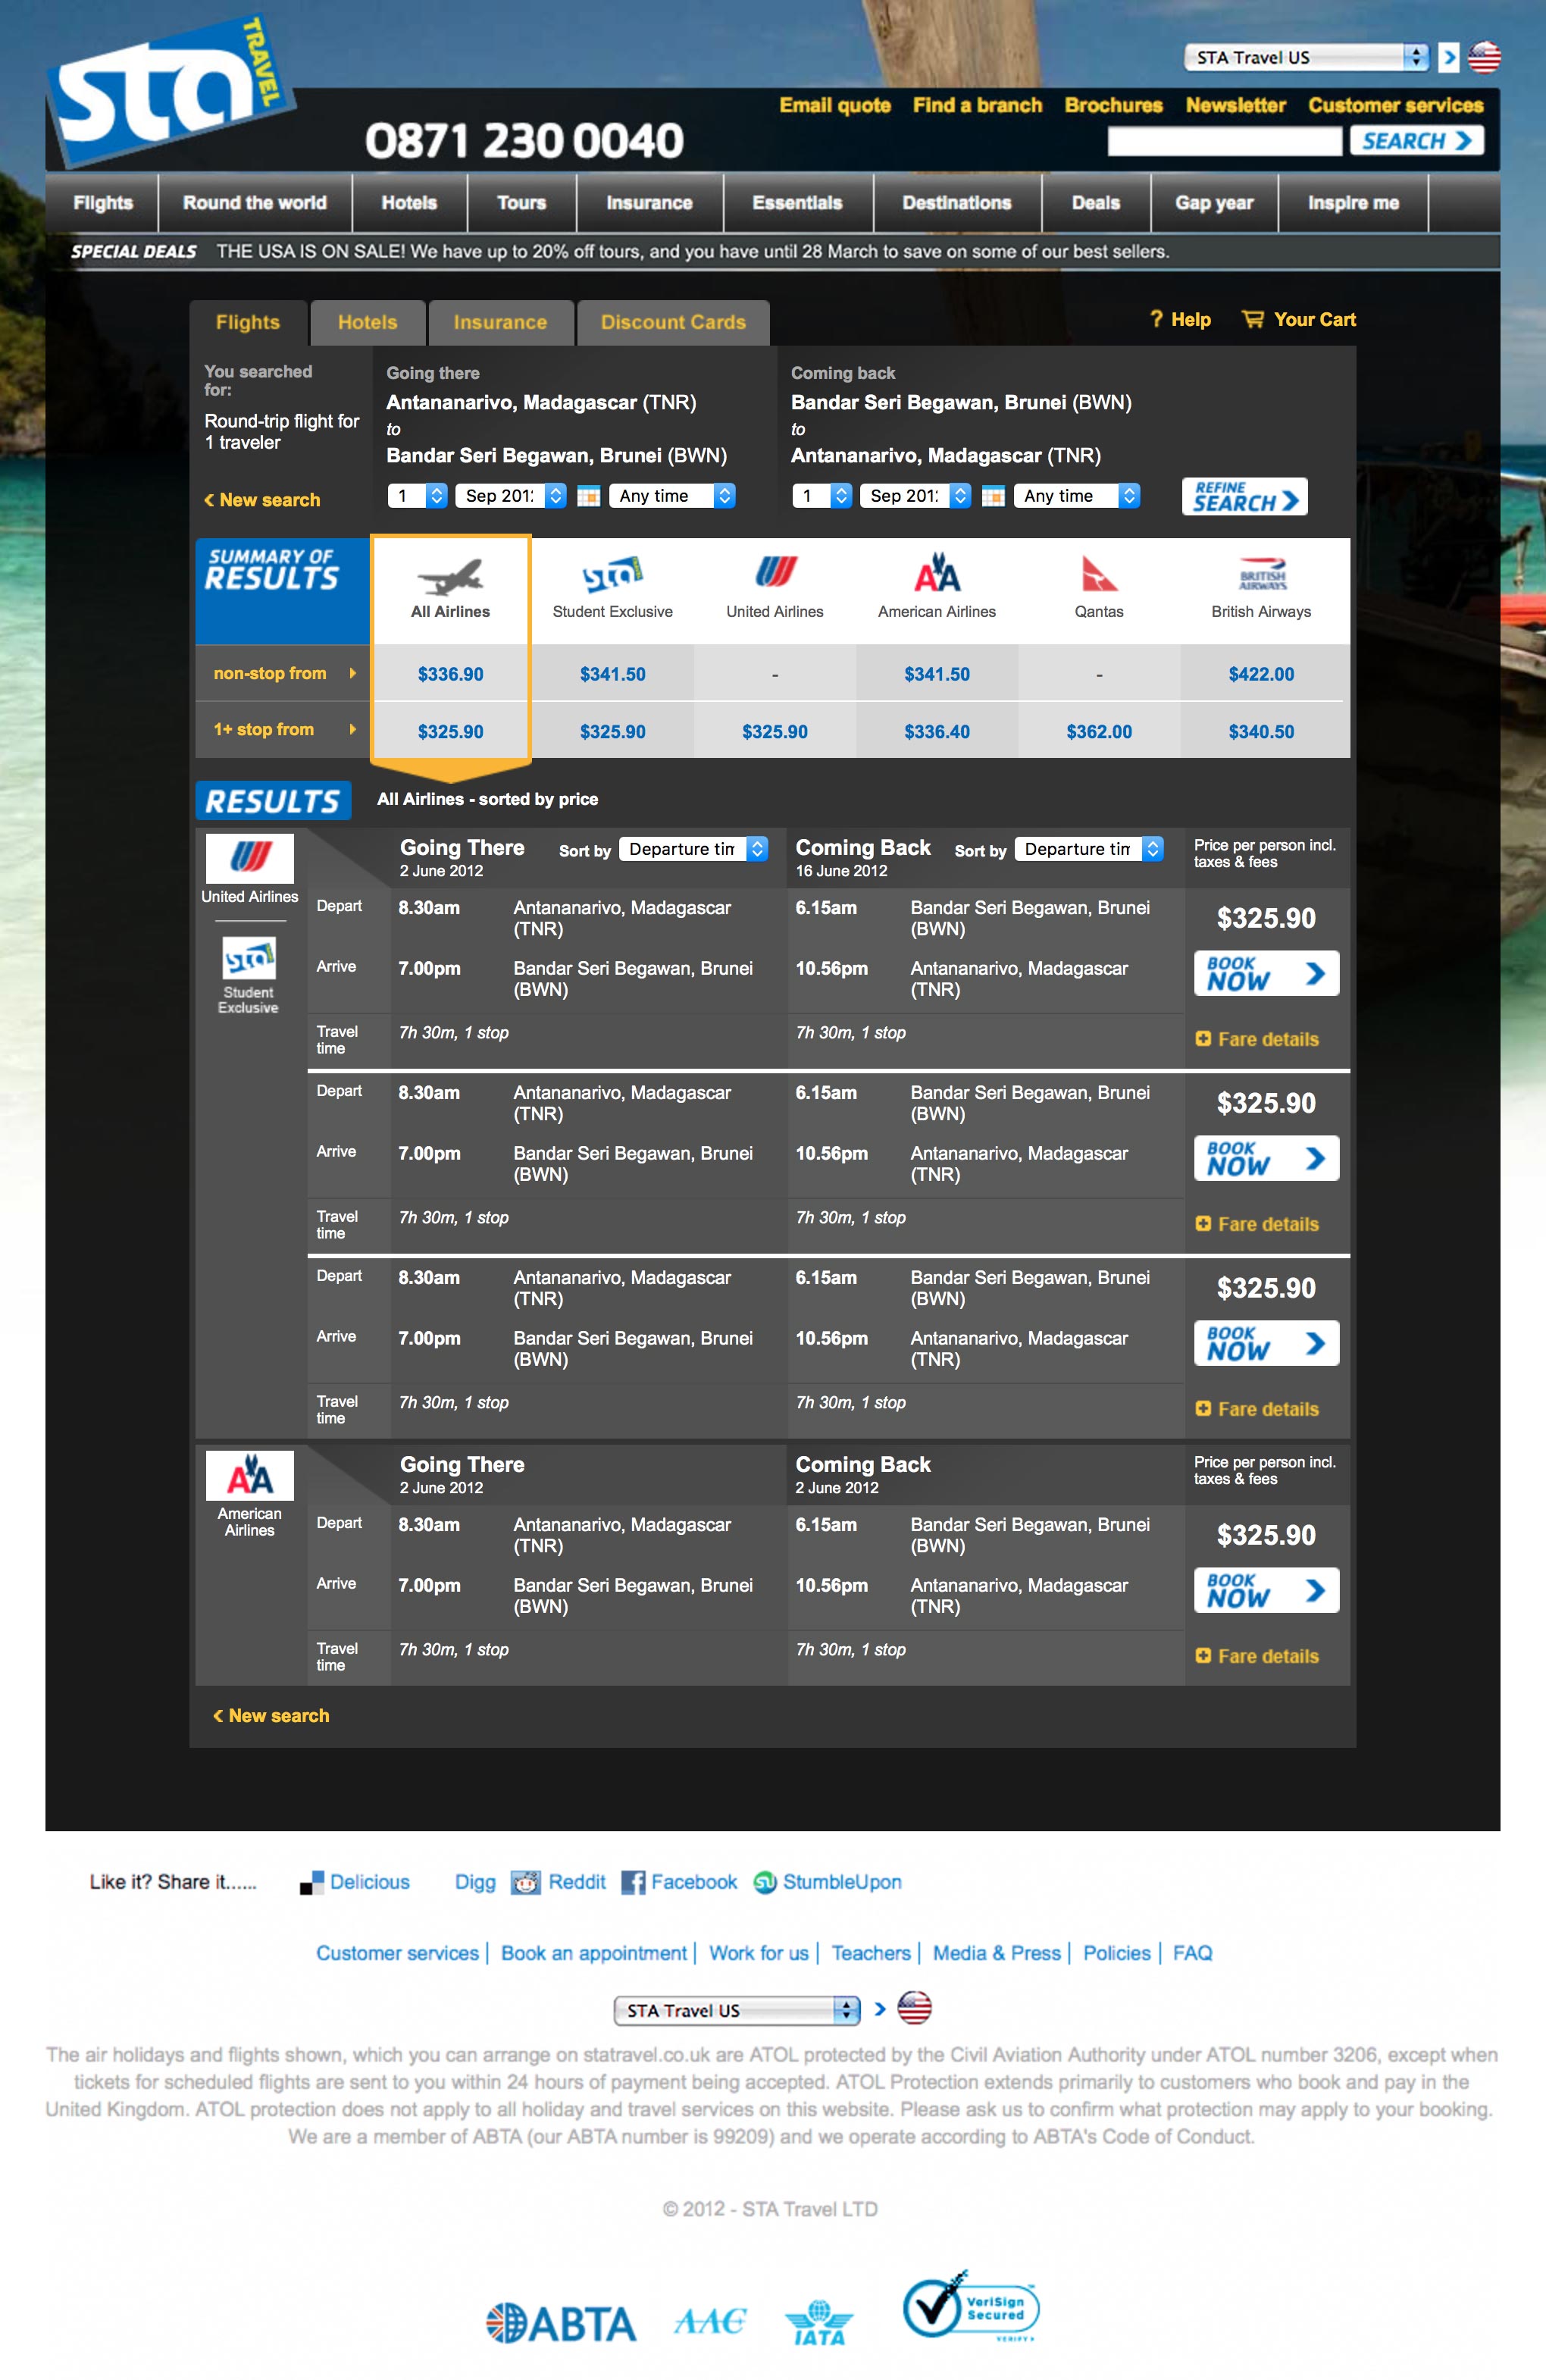 STA booking engine search results page.